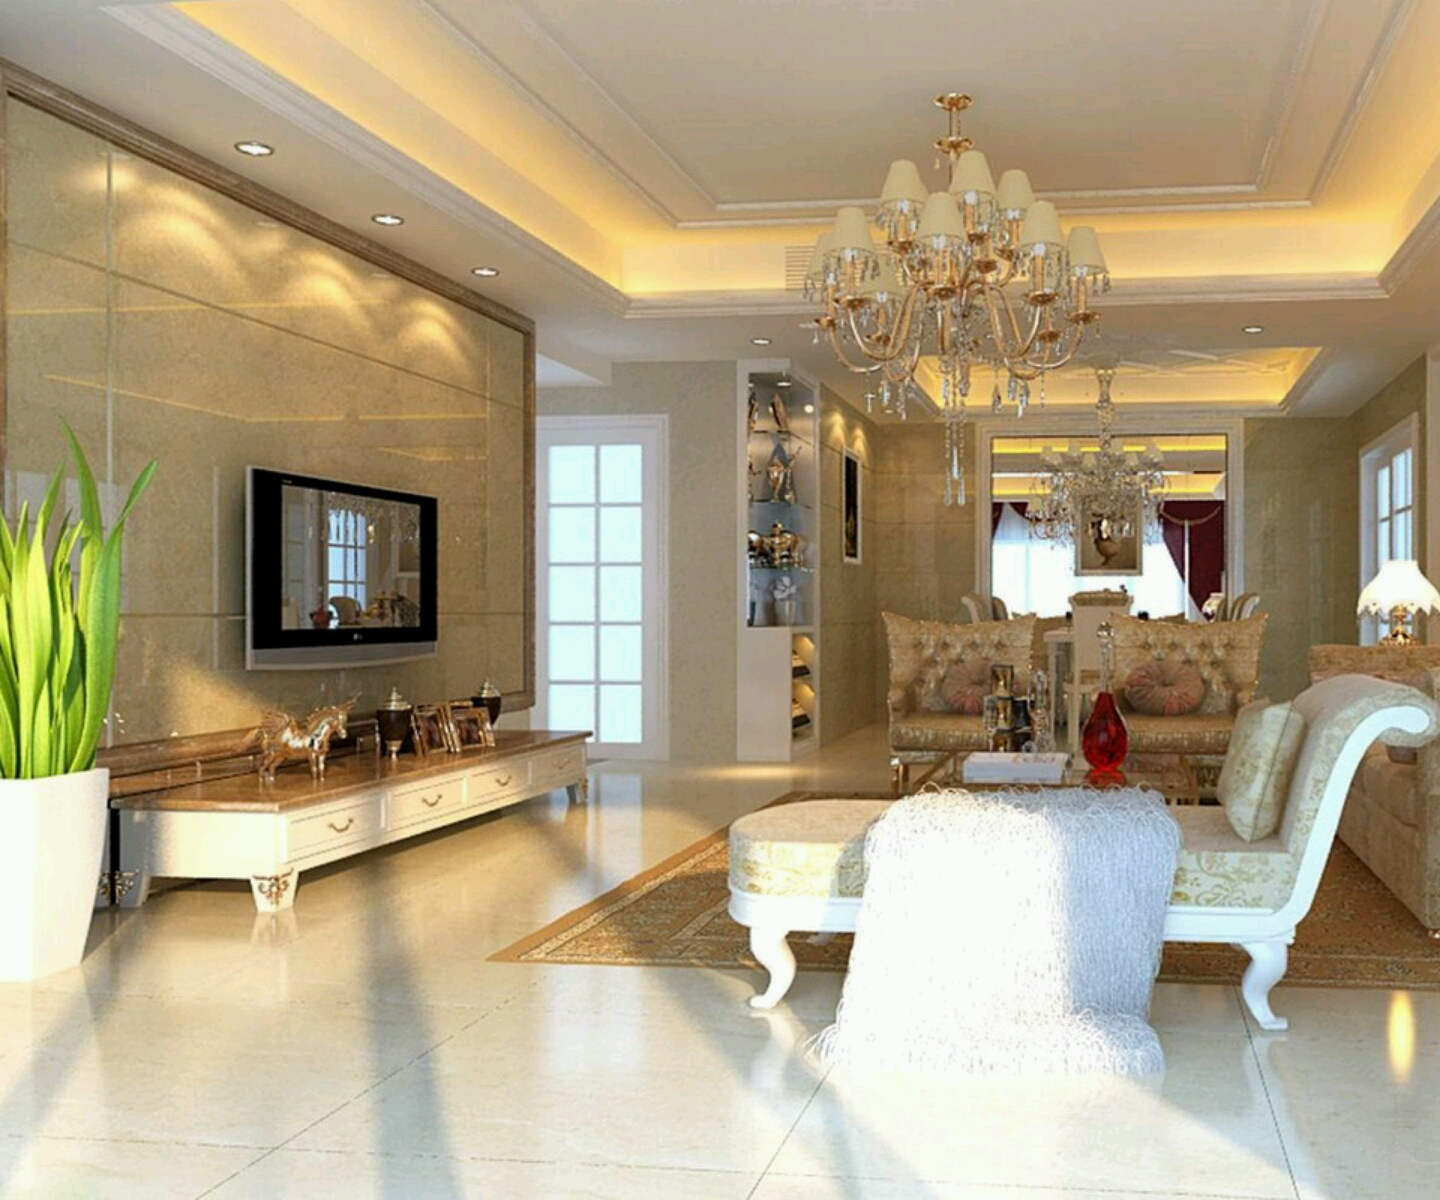 House Interior Design: Aesthetic Luxury For Every Room